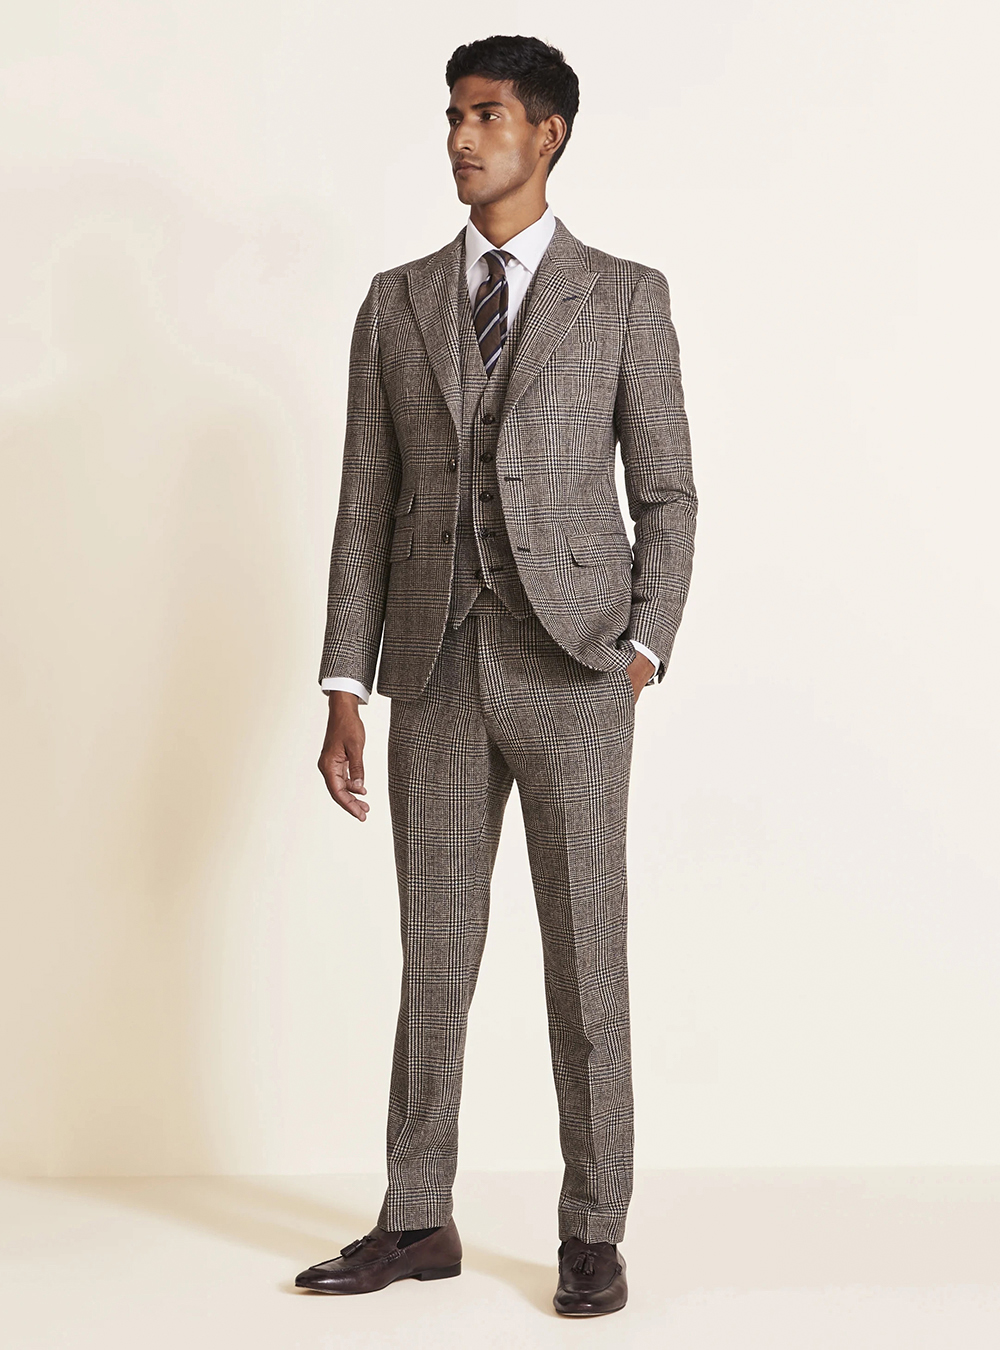 light brown three-piece tweed suit with a white shirt and brown loafers